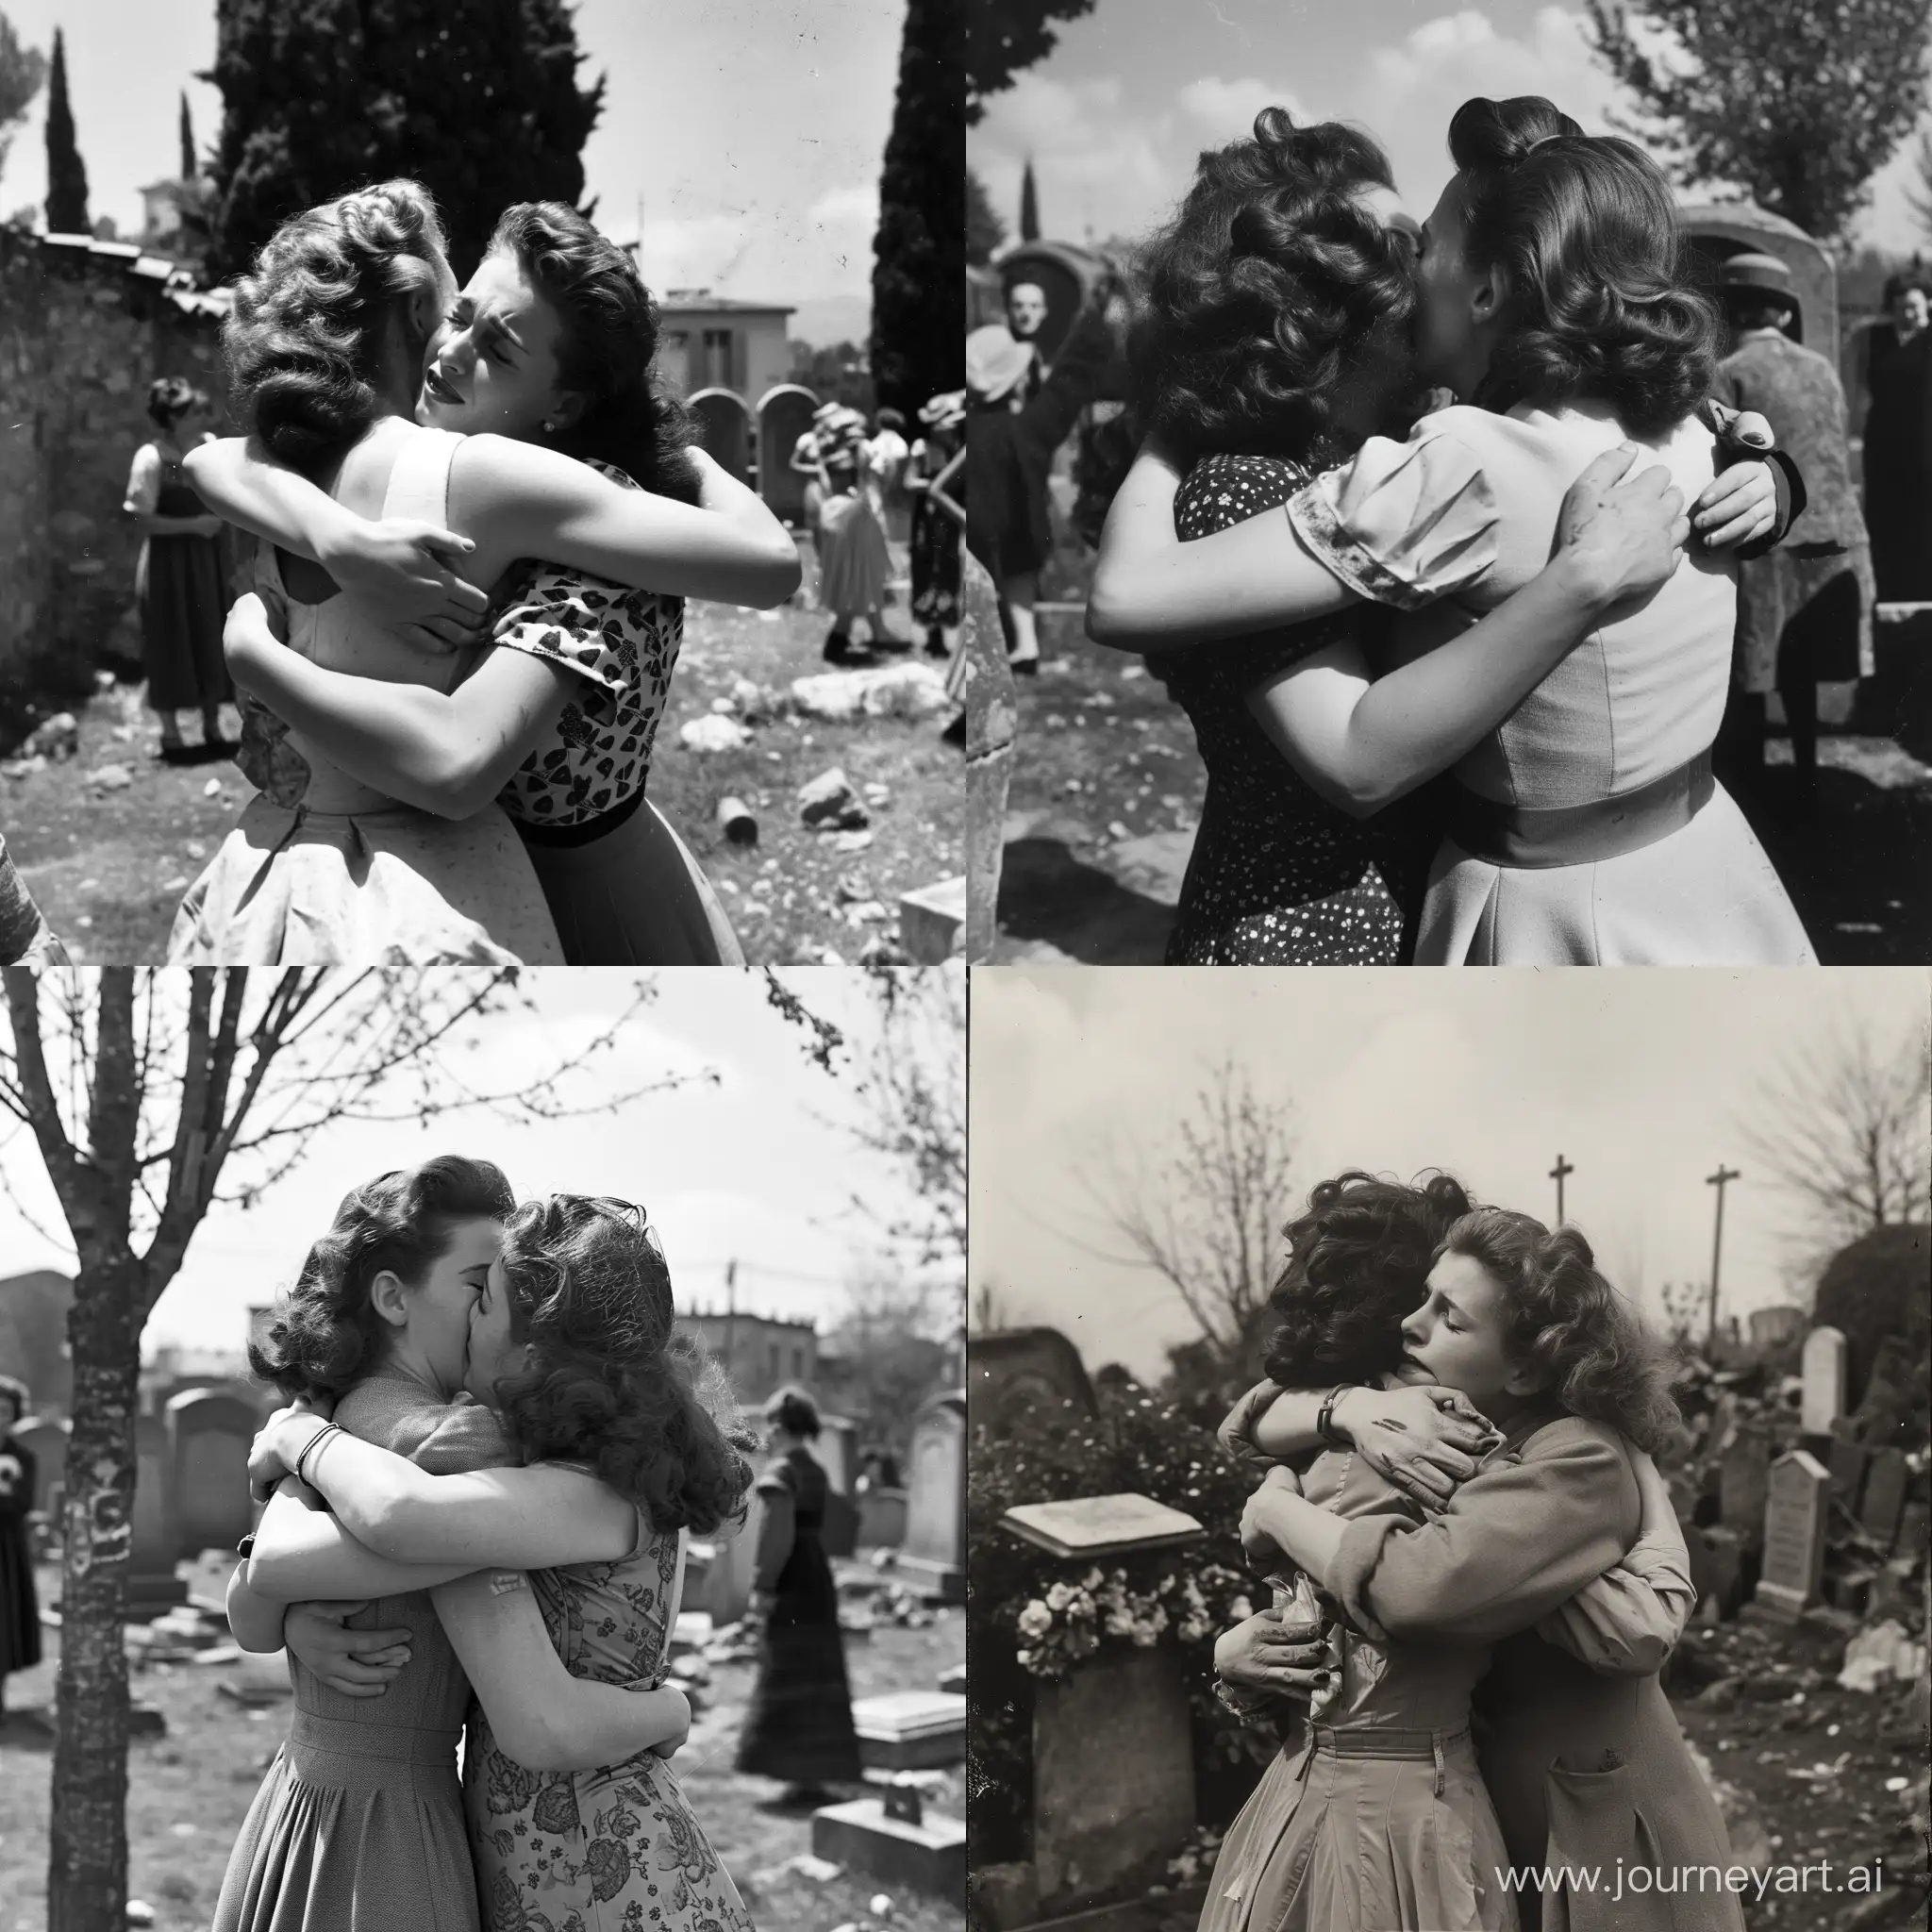 Lesbian european french and short sleeves puffy compression 1950s Photo  hug  kisse arm crying wail Lesbian european french and short sleeves puffy compression 1950s Photo and hug dance kisse arm crying wail cemeterycemetery